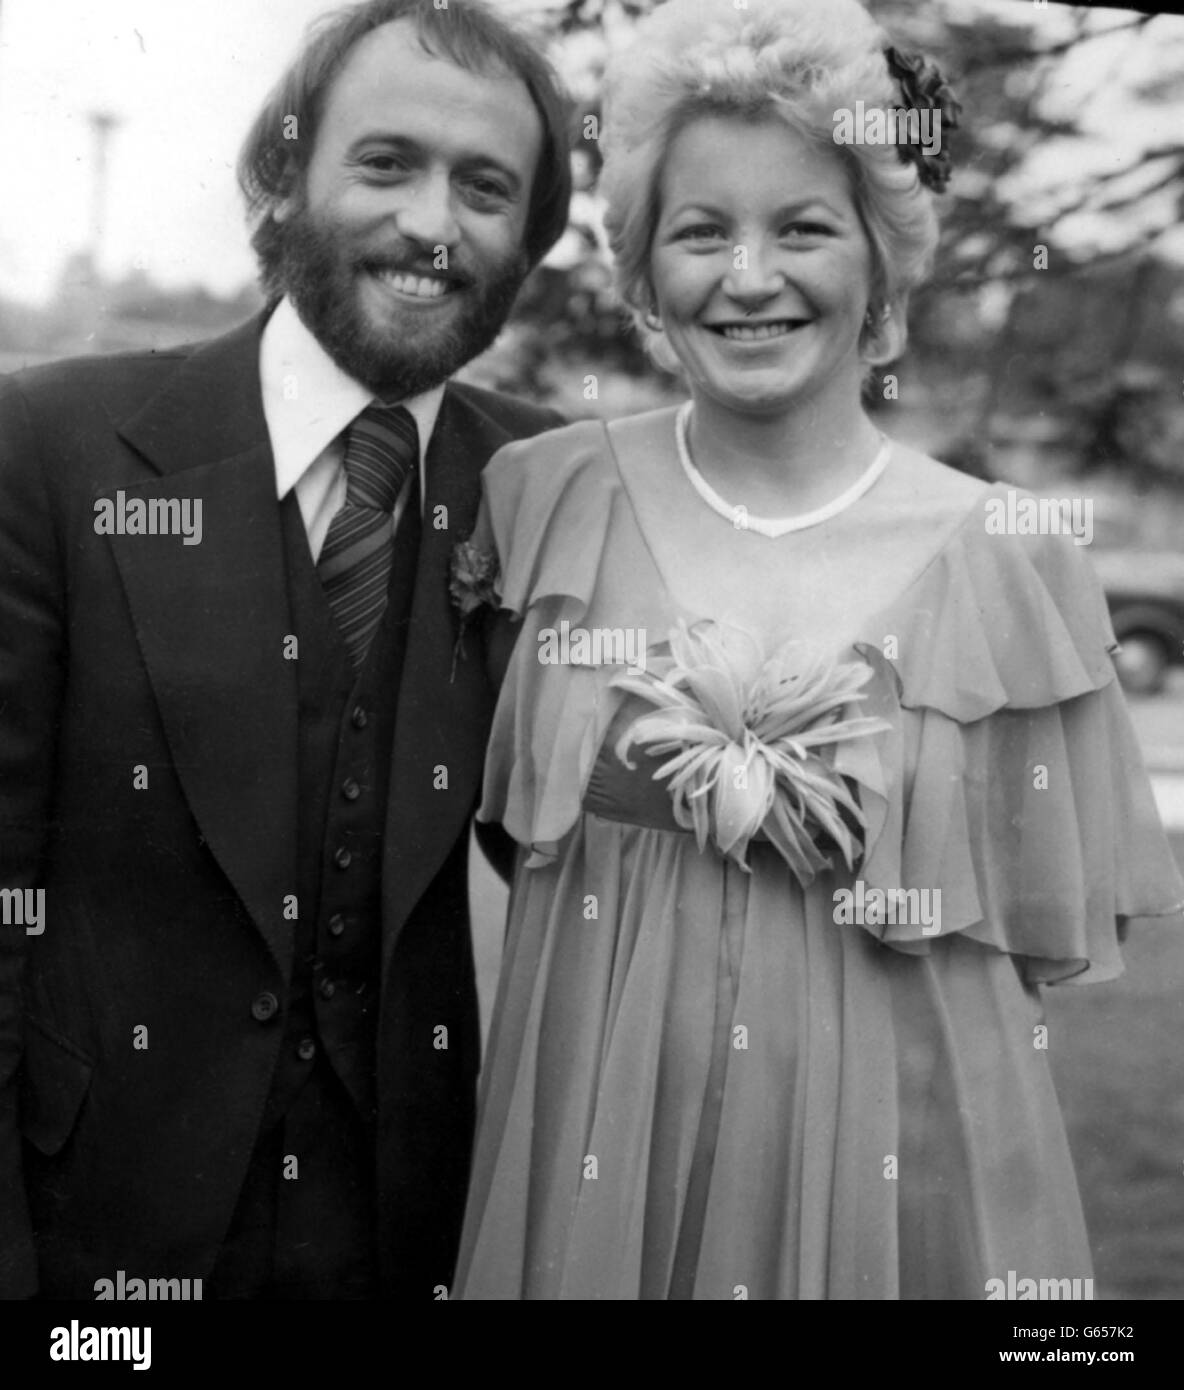 Bee Gee Maurice Gibb and his bride Yvonne Spenceley after they were married at Haywards Heath Register Office. Maurice, recently divorced from singer Lulu, met Yvonne when the Bee Gees were singing in a night club in Batley, Yorkshire, where she was working. 12/01/03 : Bee Gee Maurice Gibb and his bride Yvonne Spenceley after they were married at Haywards Heath Register Office. Gibb died in hospital on Sunday 12th 2003, his family said. The 53-year-old had been in a critical condition in hospital after suffering a heart attack during an operation to remove an intestinal blockage after he Stock Photo